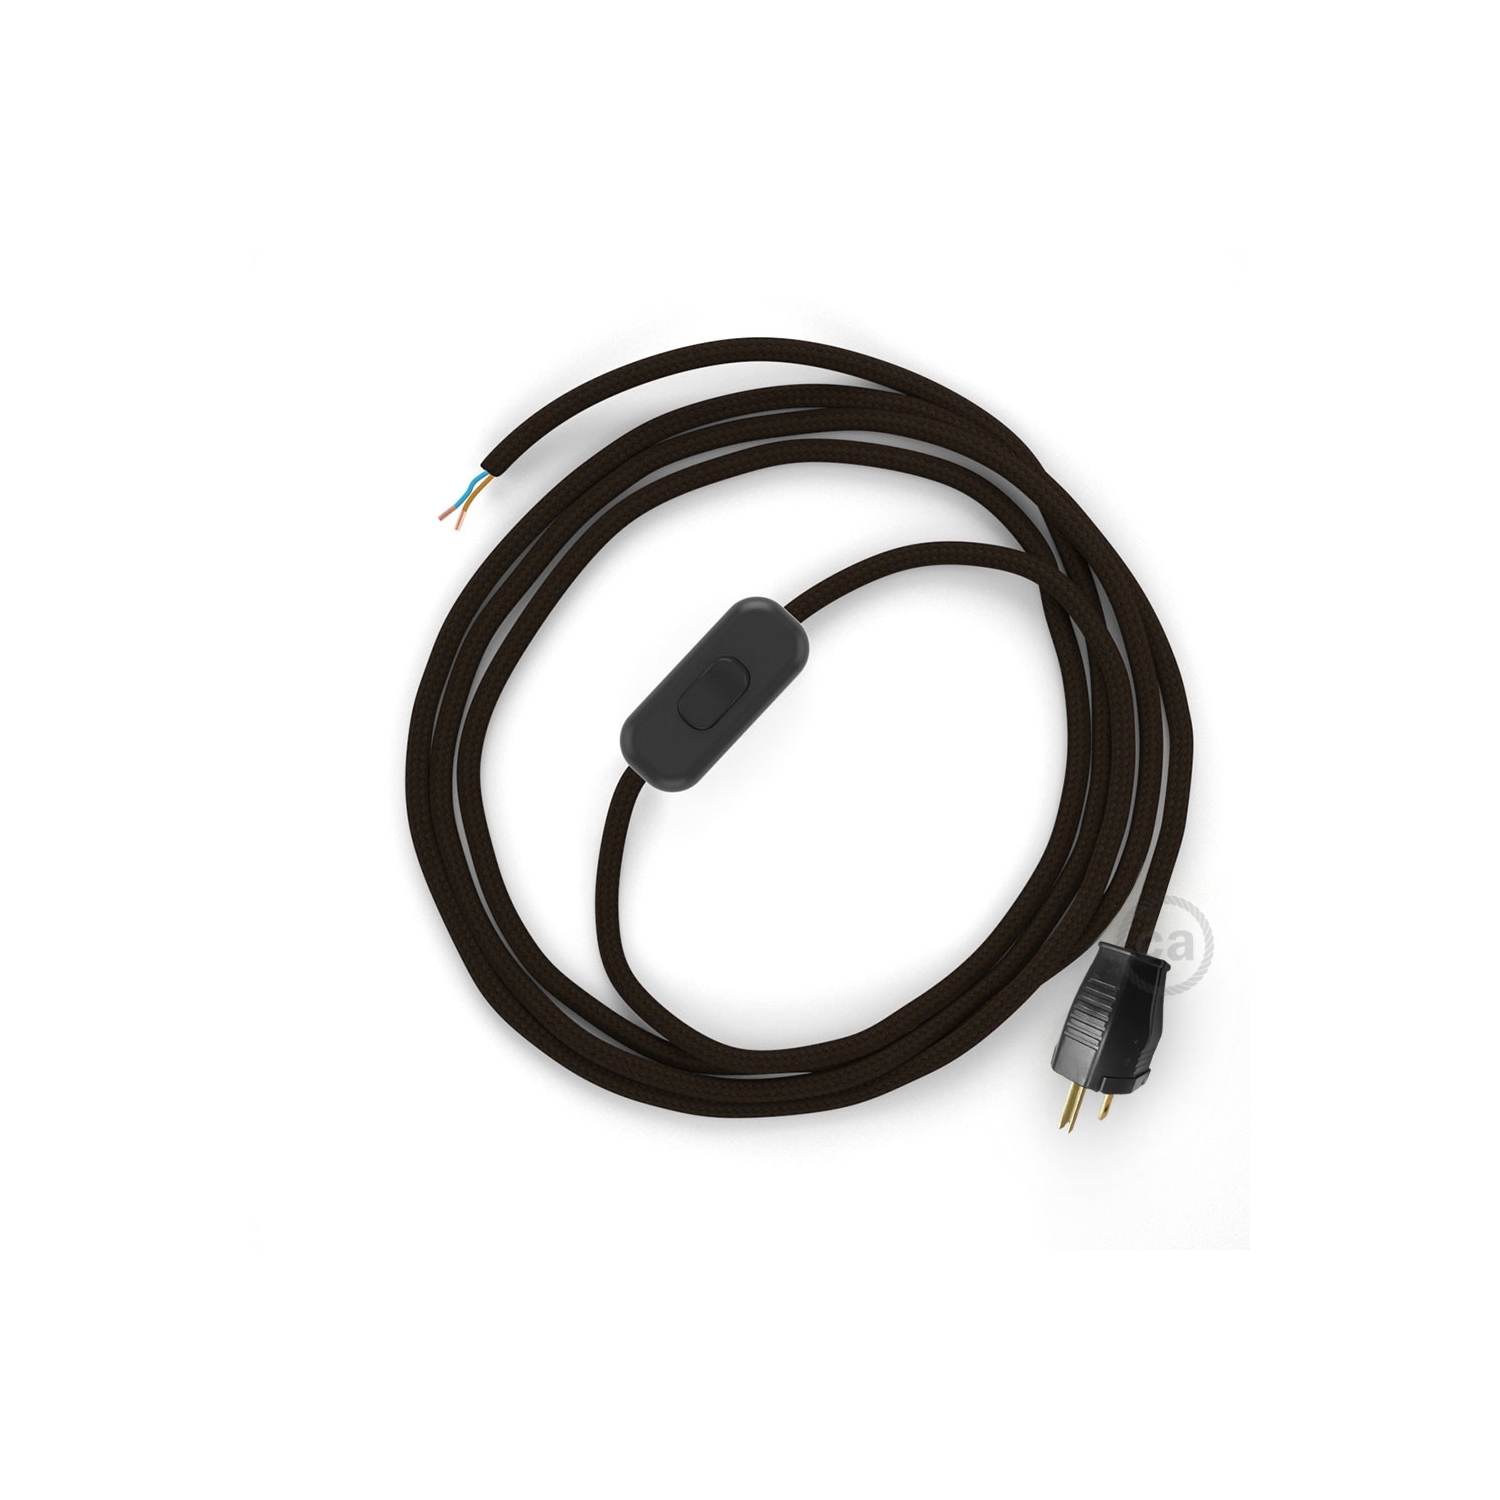 Power Cord with in-line switch, RM13 Brown Rayon - Choose color of switch/plug